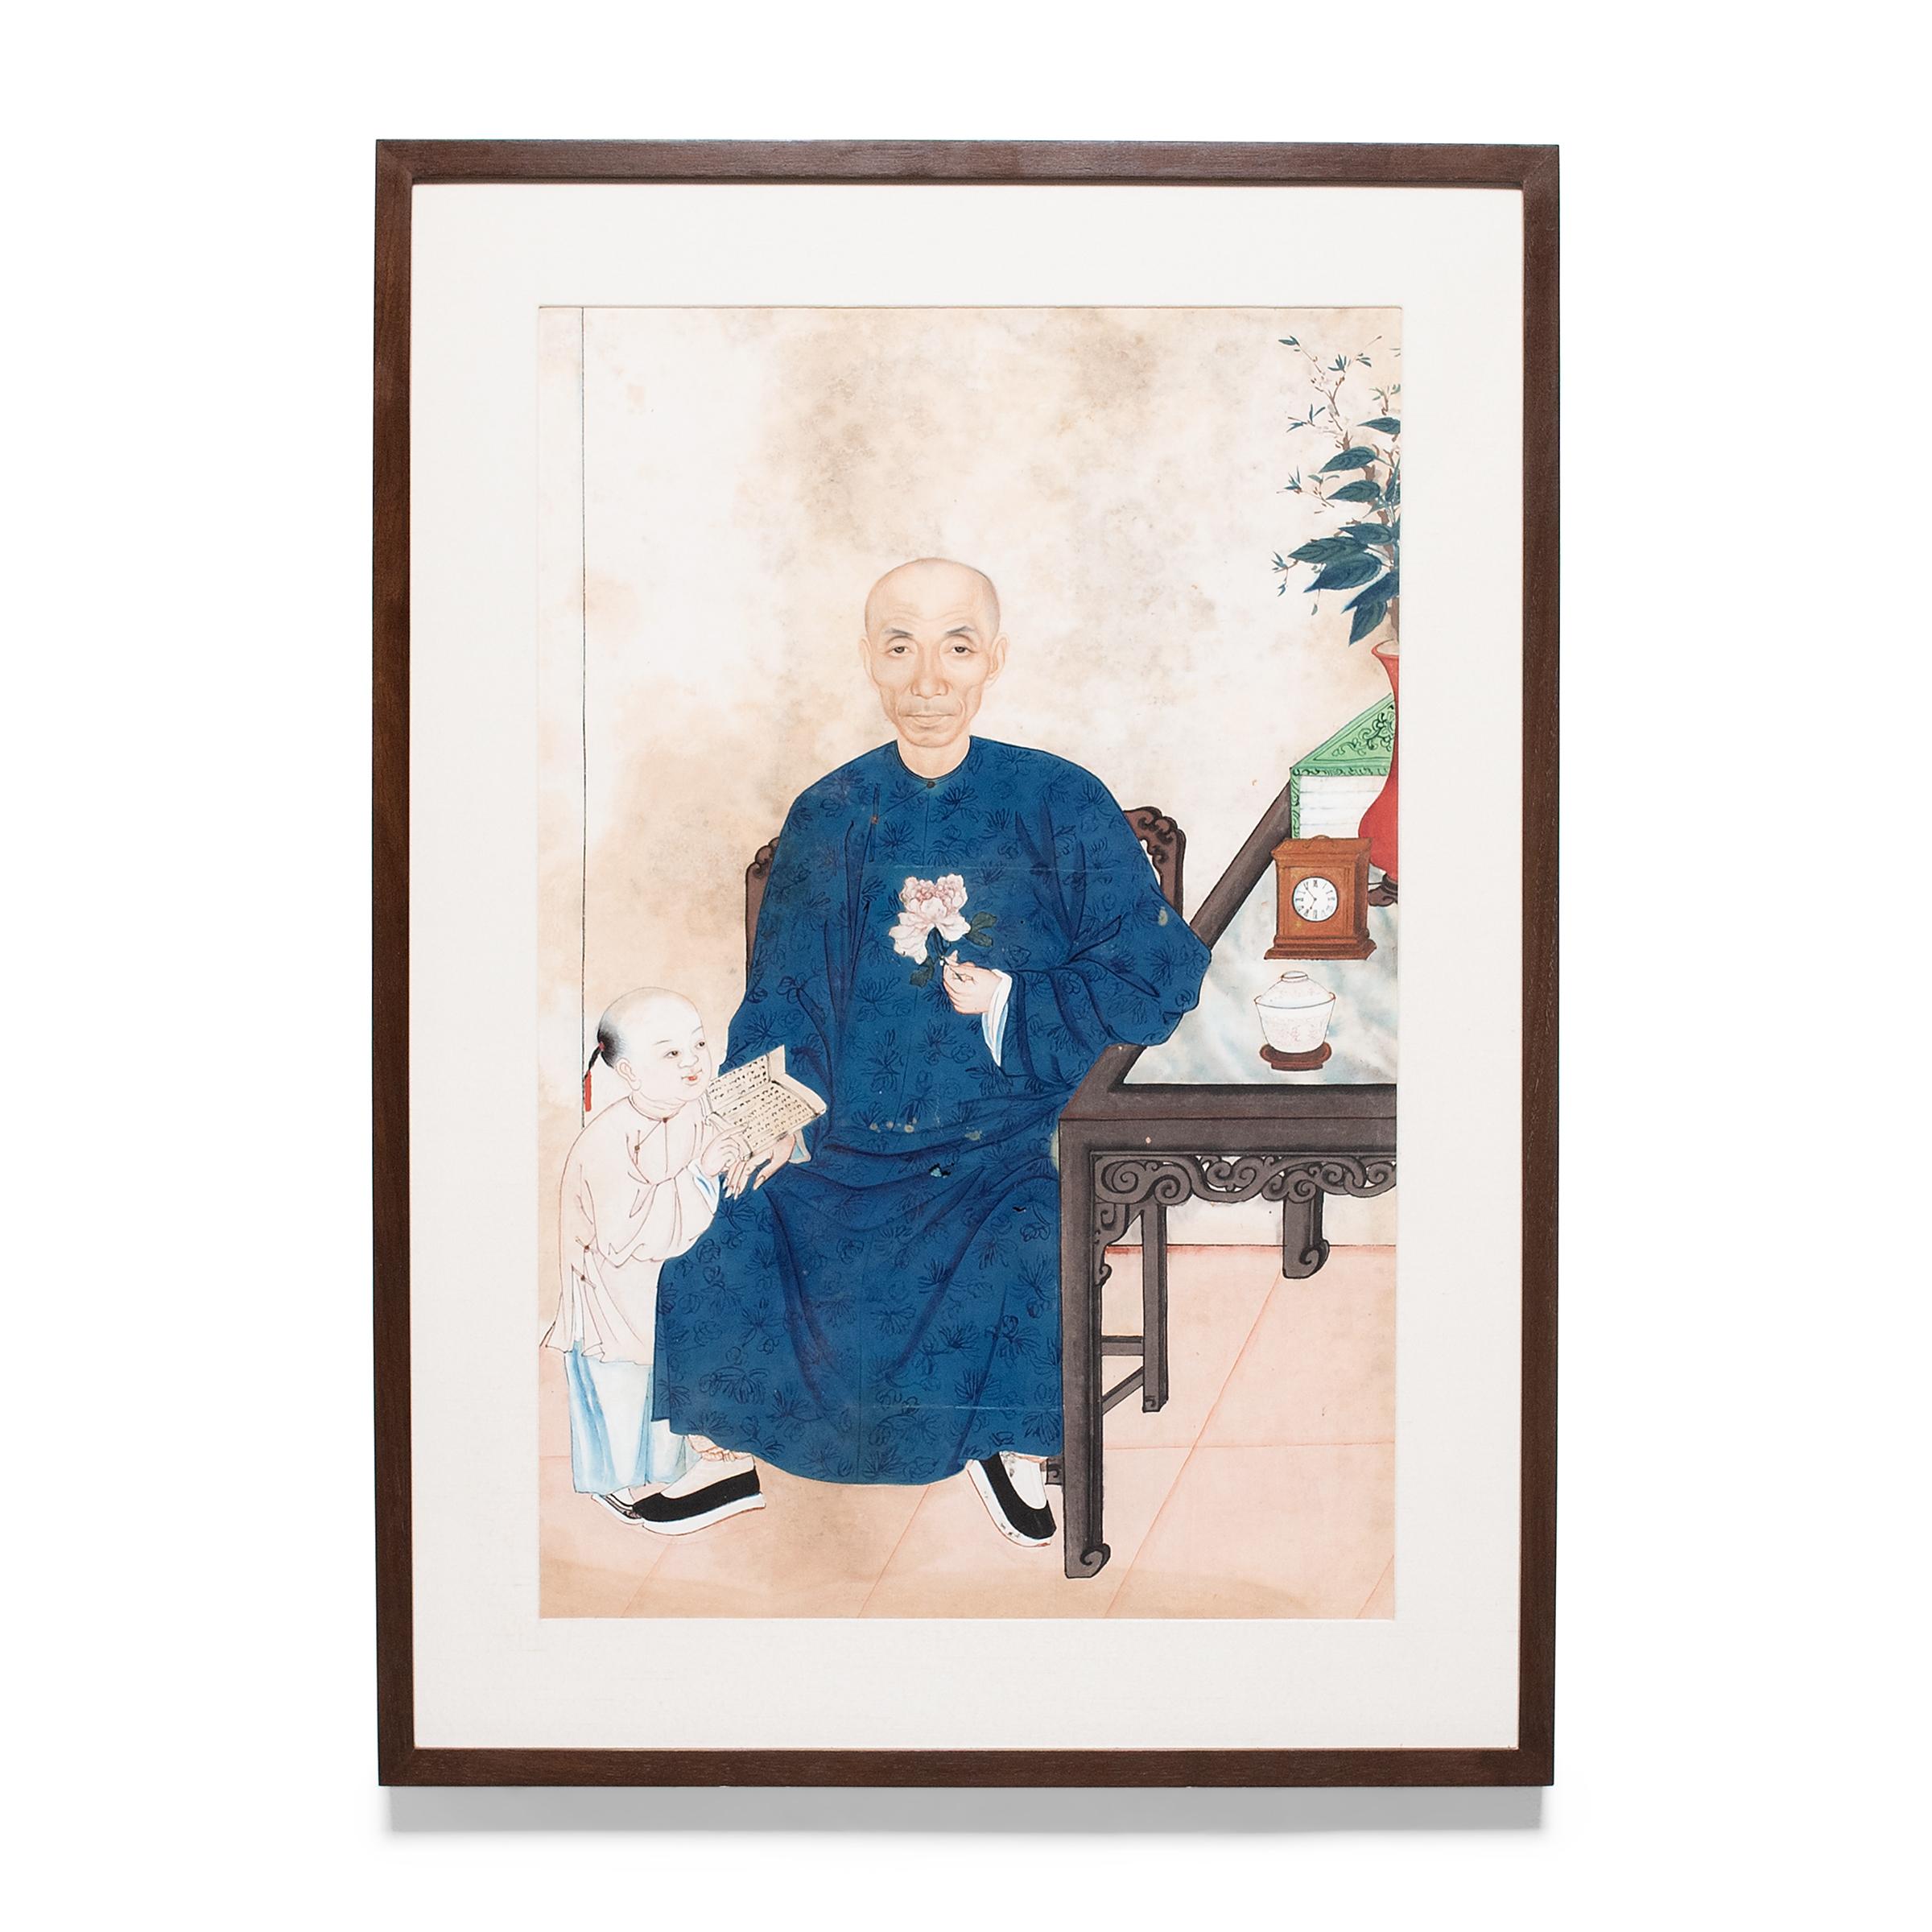 Believing that the departed continue to hold influence over the lives of the living, many Chinese households honor their ancestors in private family rituals, invoking their spirits for long life, health, and prosperity. Commemorative portraits,